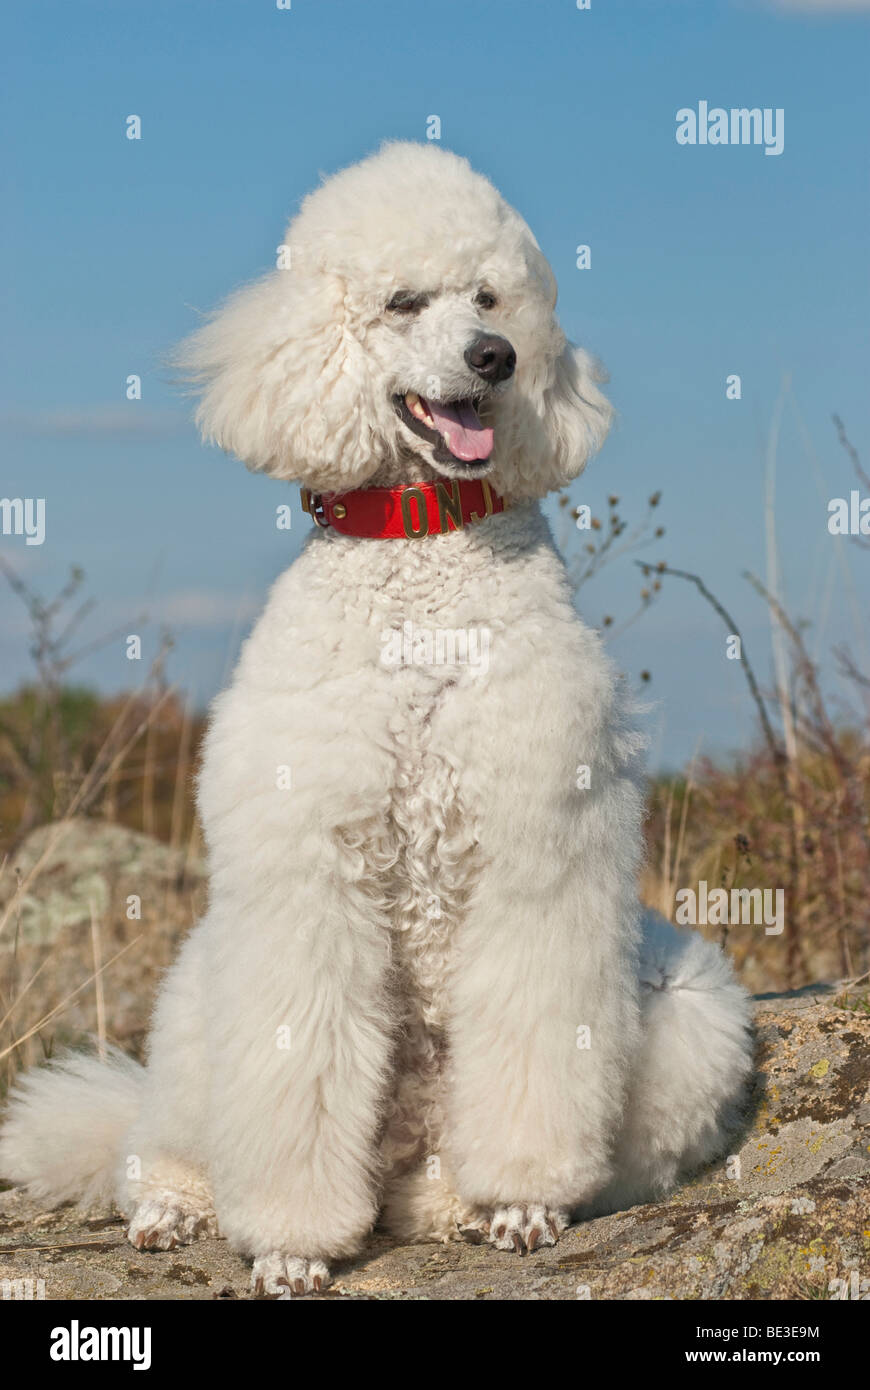 Giant White Poodle High Resolution 